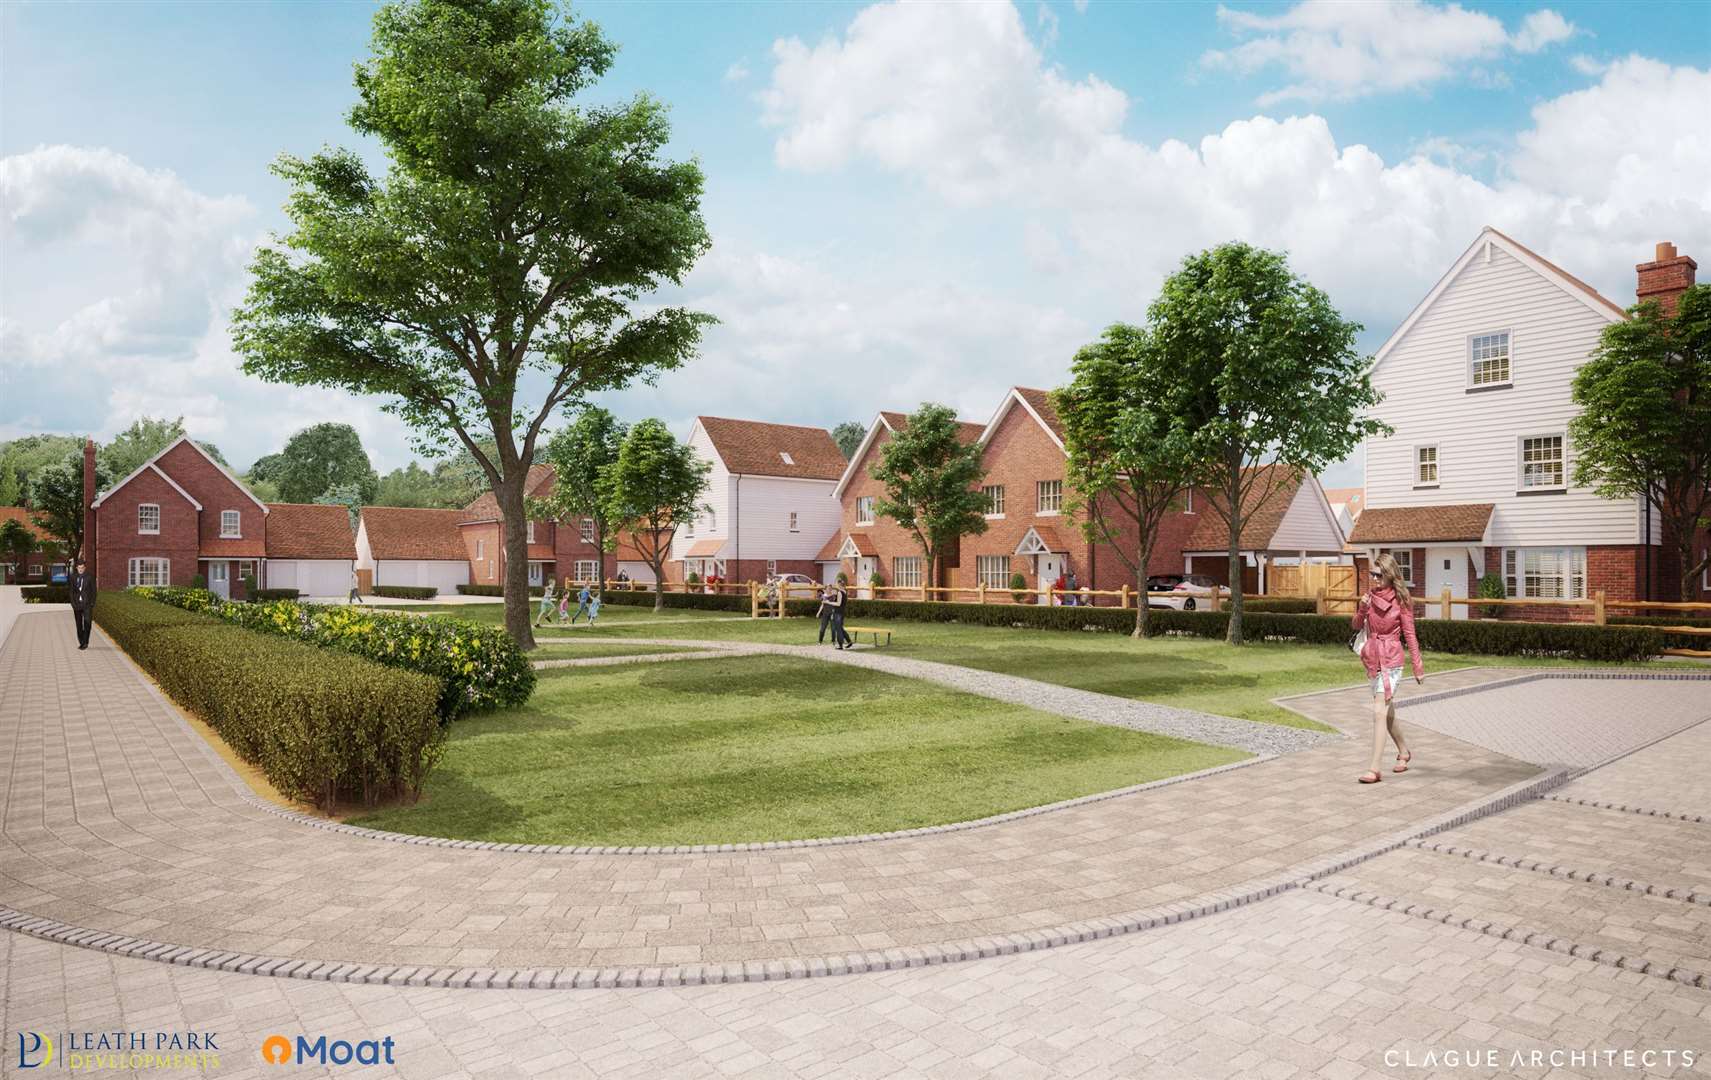 New images of how the homes in Littlebourne will look once built. Picture: Clague Architects. (7820913)